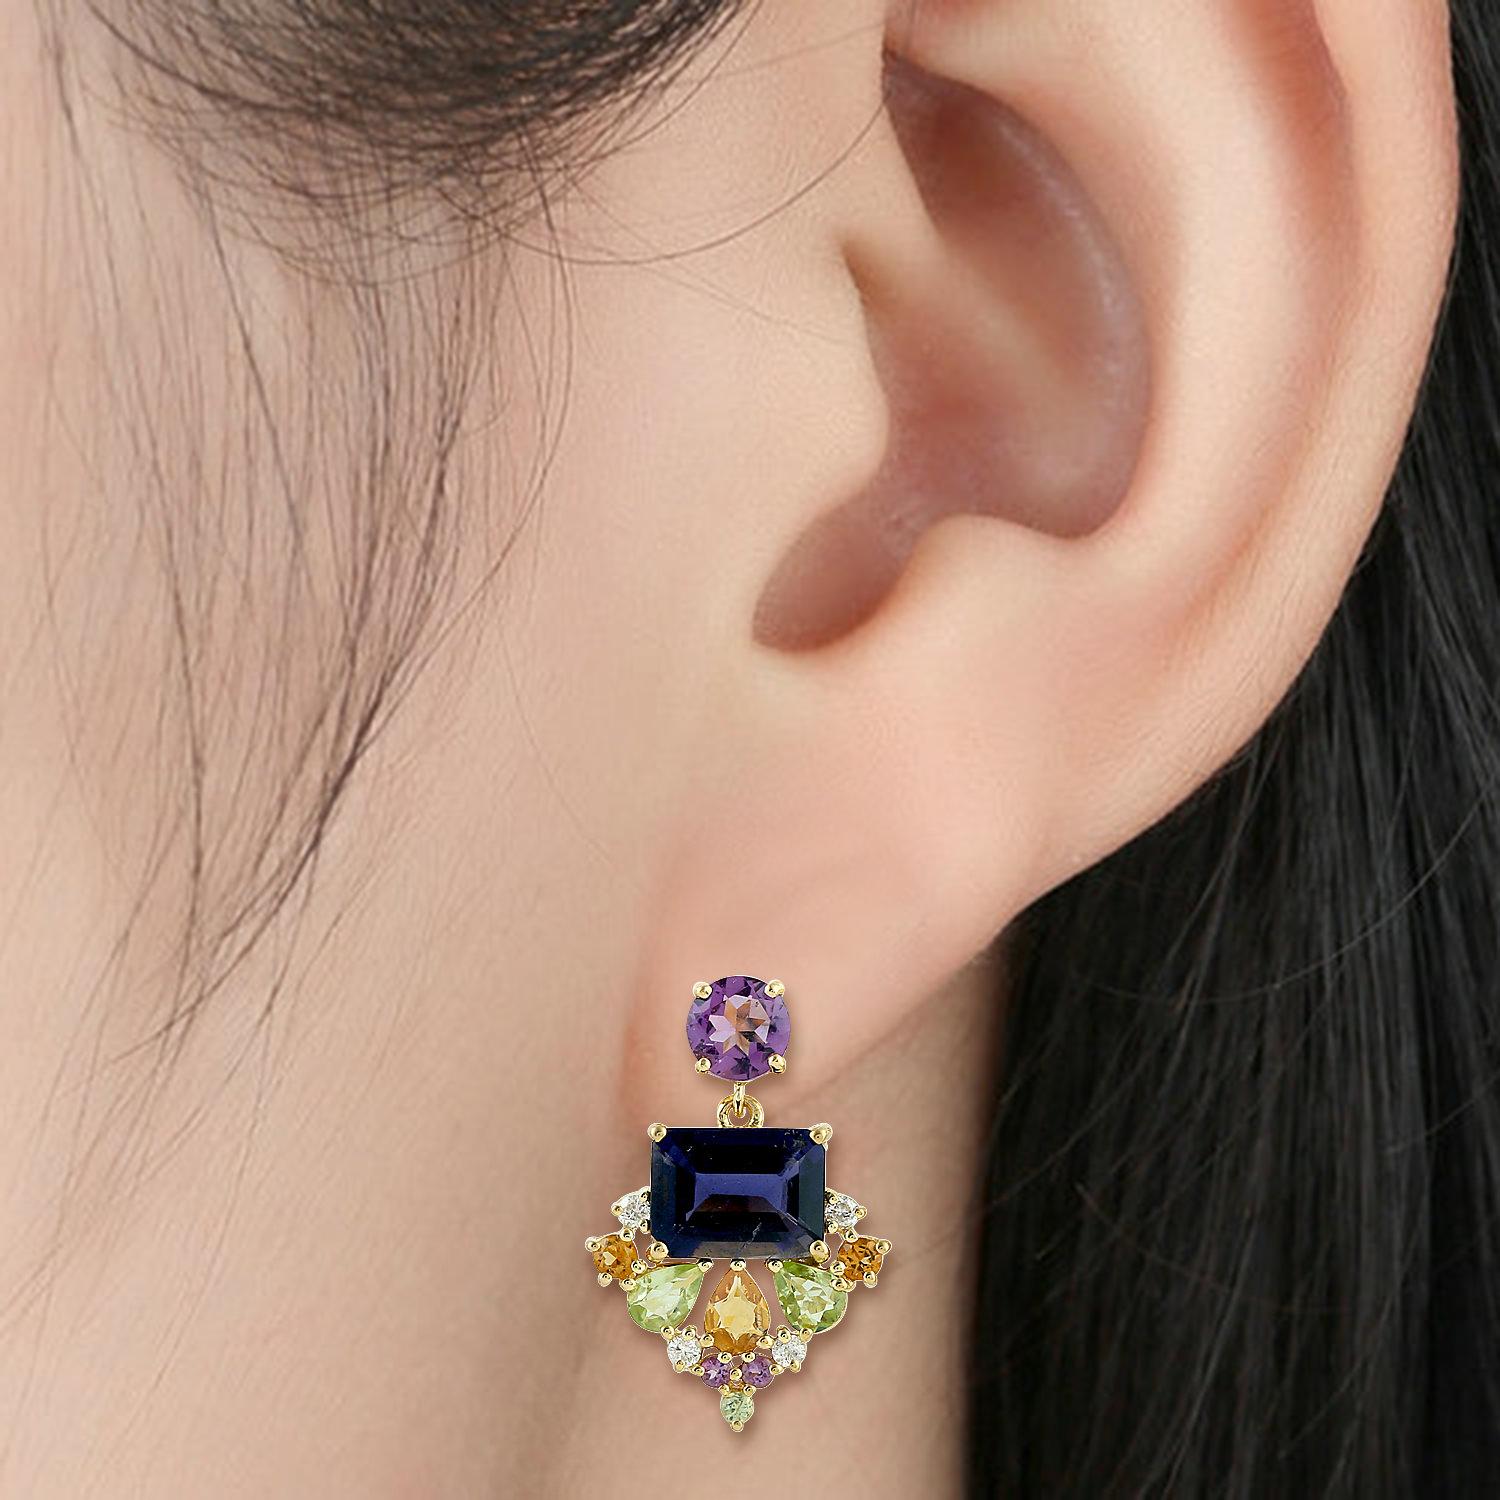 Cast from 18K gold, these beautiful multi gemstone earrings are hand set with .50 carats Citrine, .98 carats Amethyst and .44 carats Iolite.

FOLLOW  MEGHNA JEWELS storefront to view the latest collection & exclusive pieces.  Meghna Jewels is